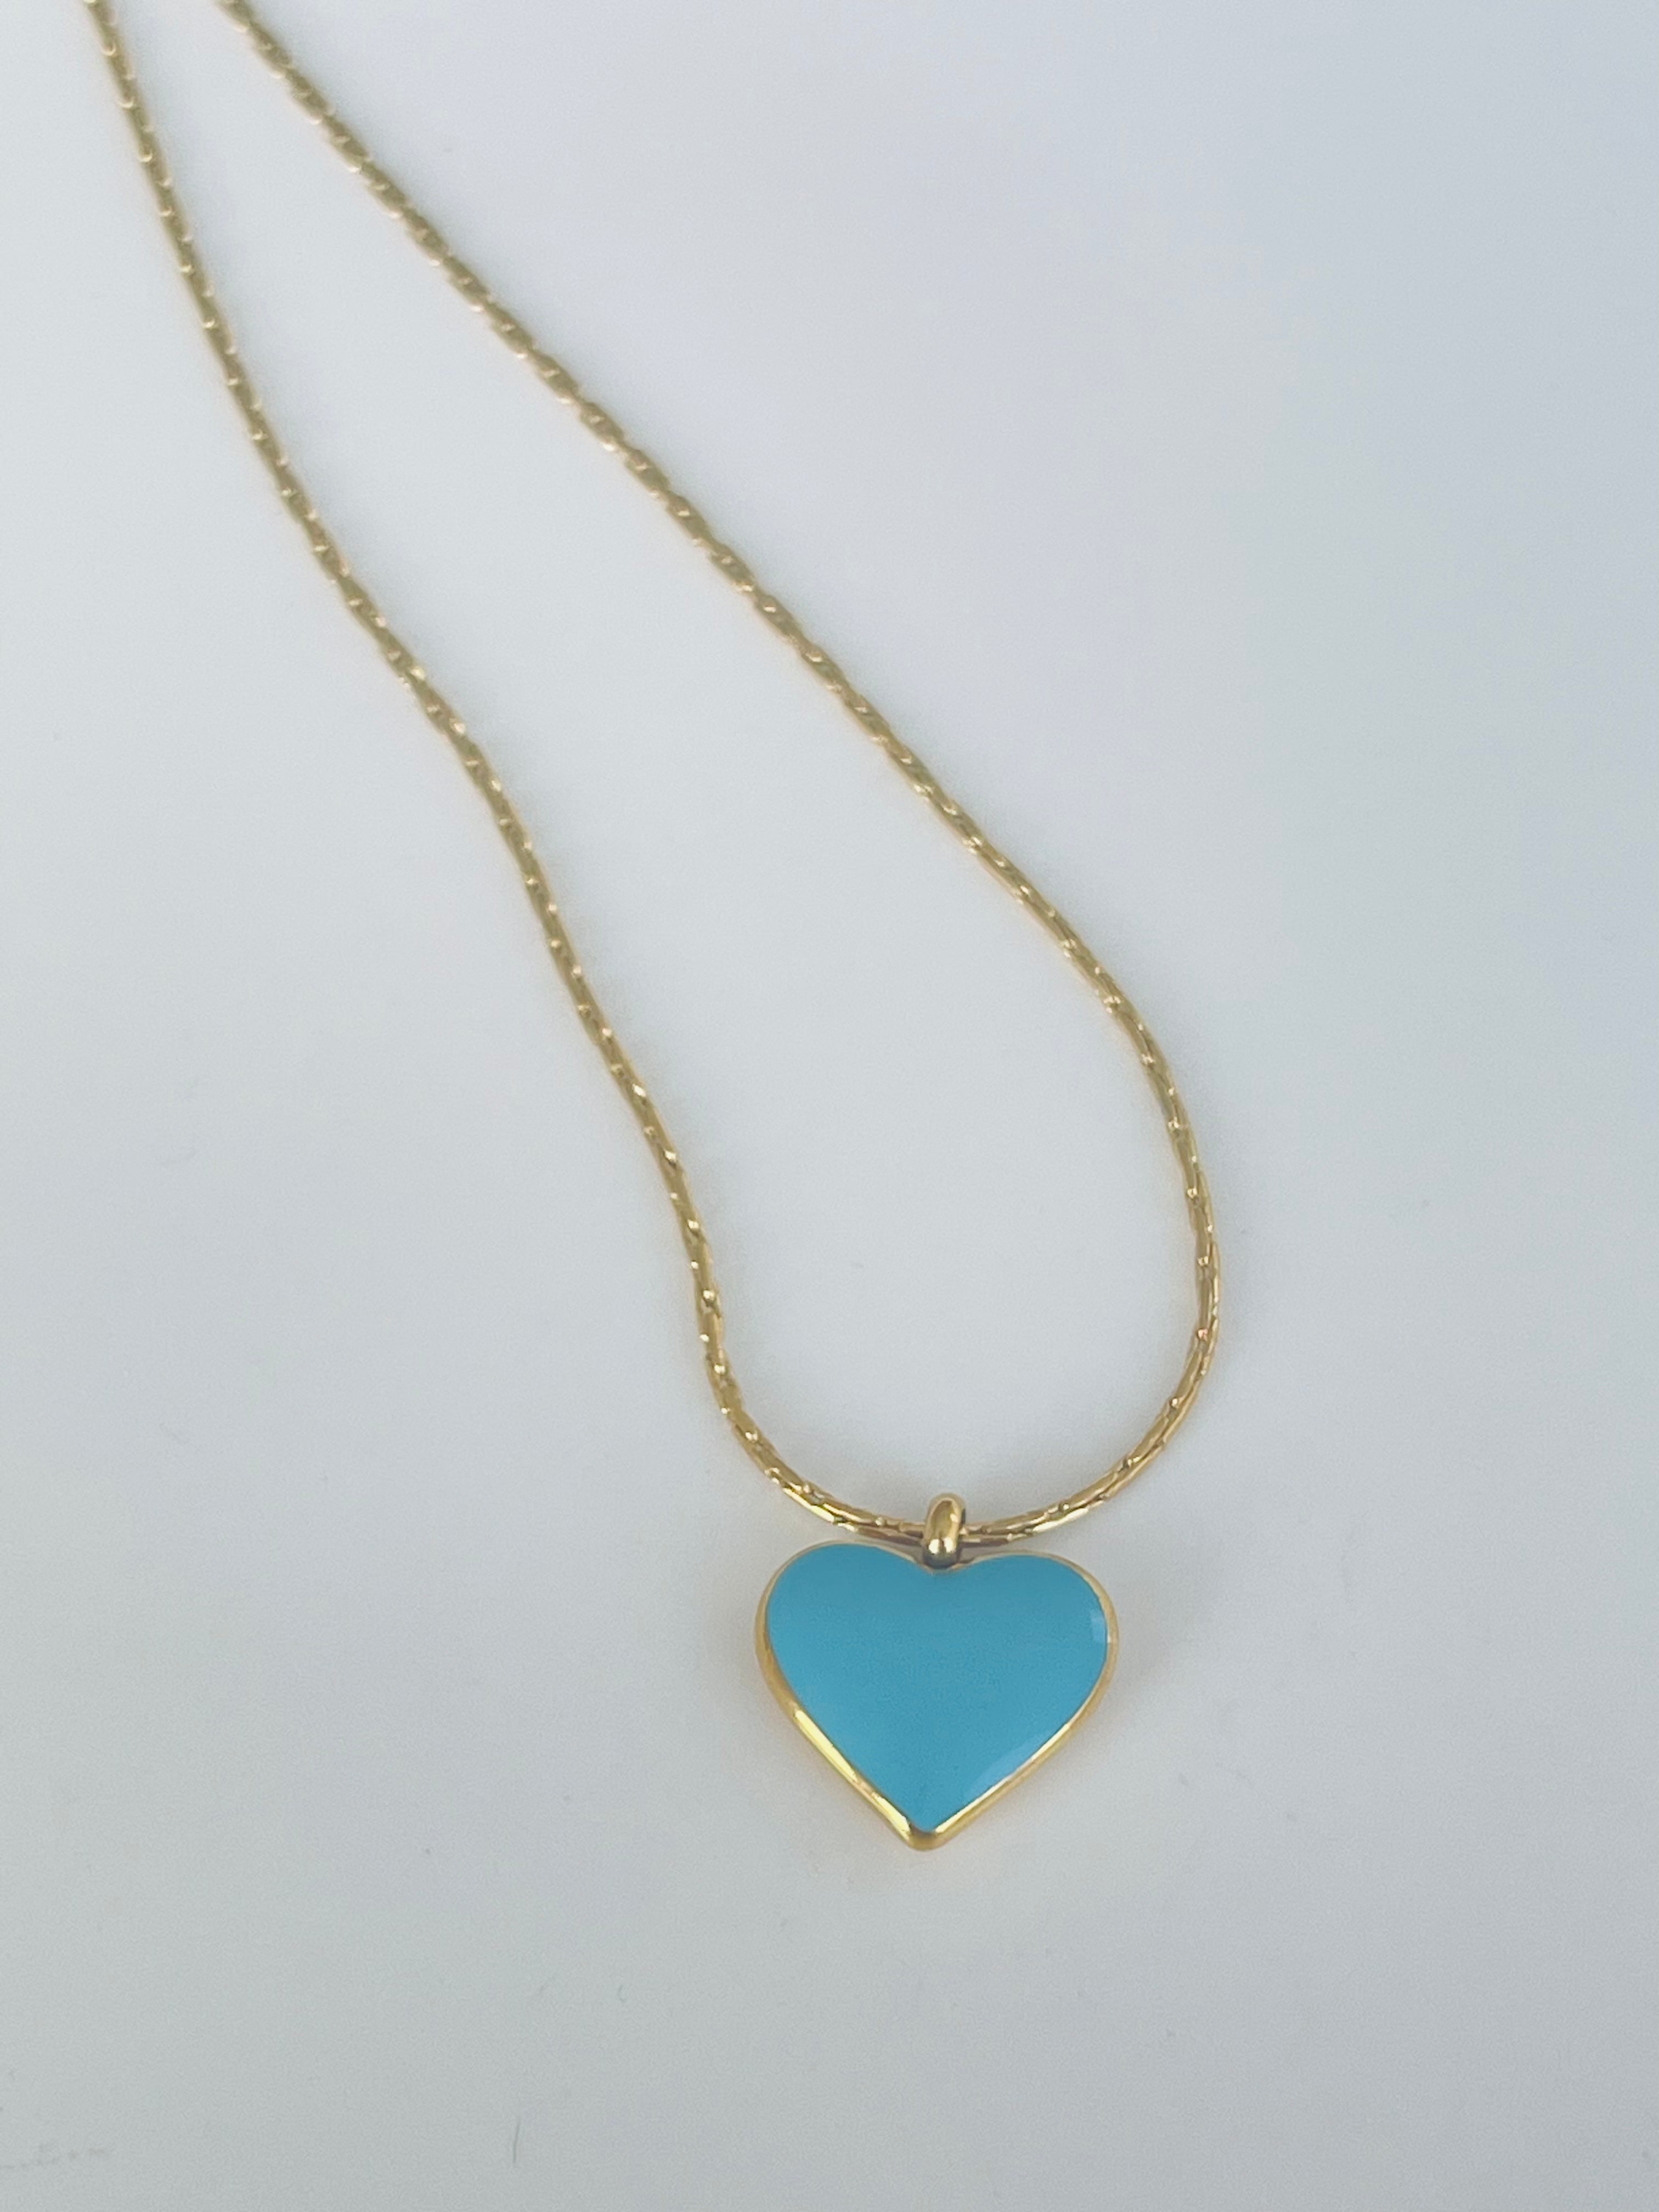 Turquoise Heart • Reversible!